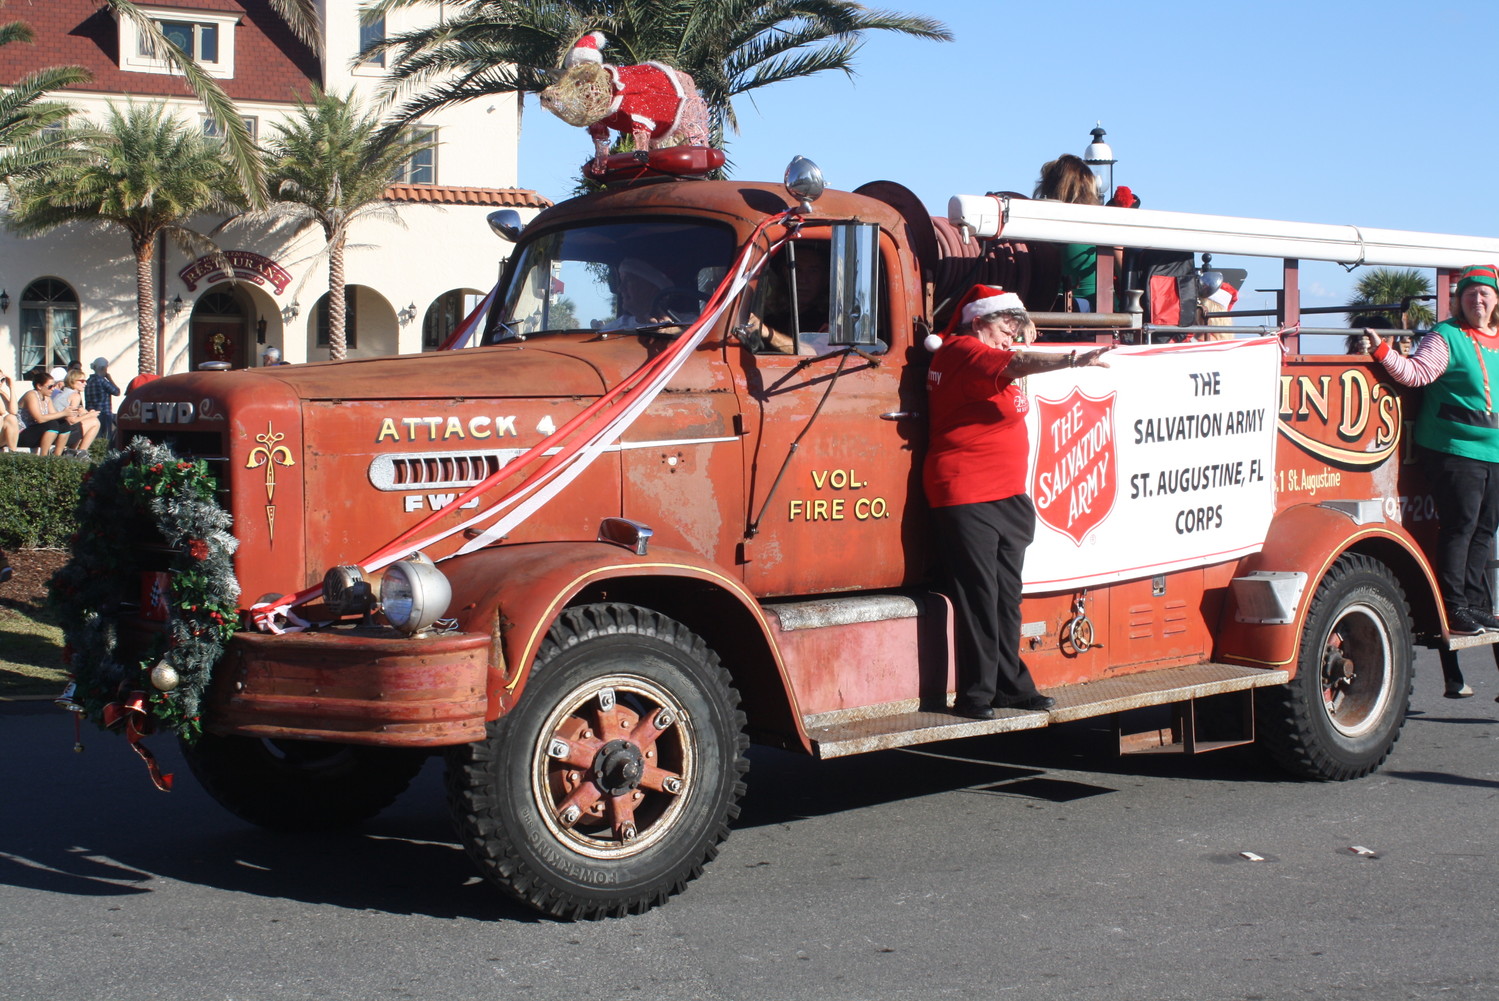 The Salvation Army truck makes its way through Downtown St. Augustine.